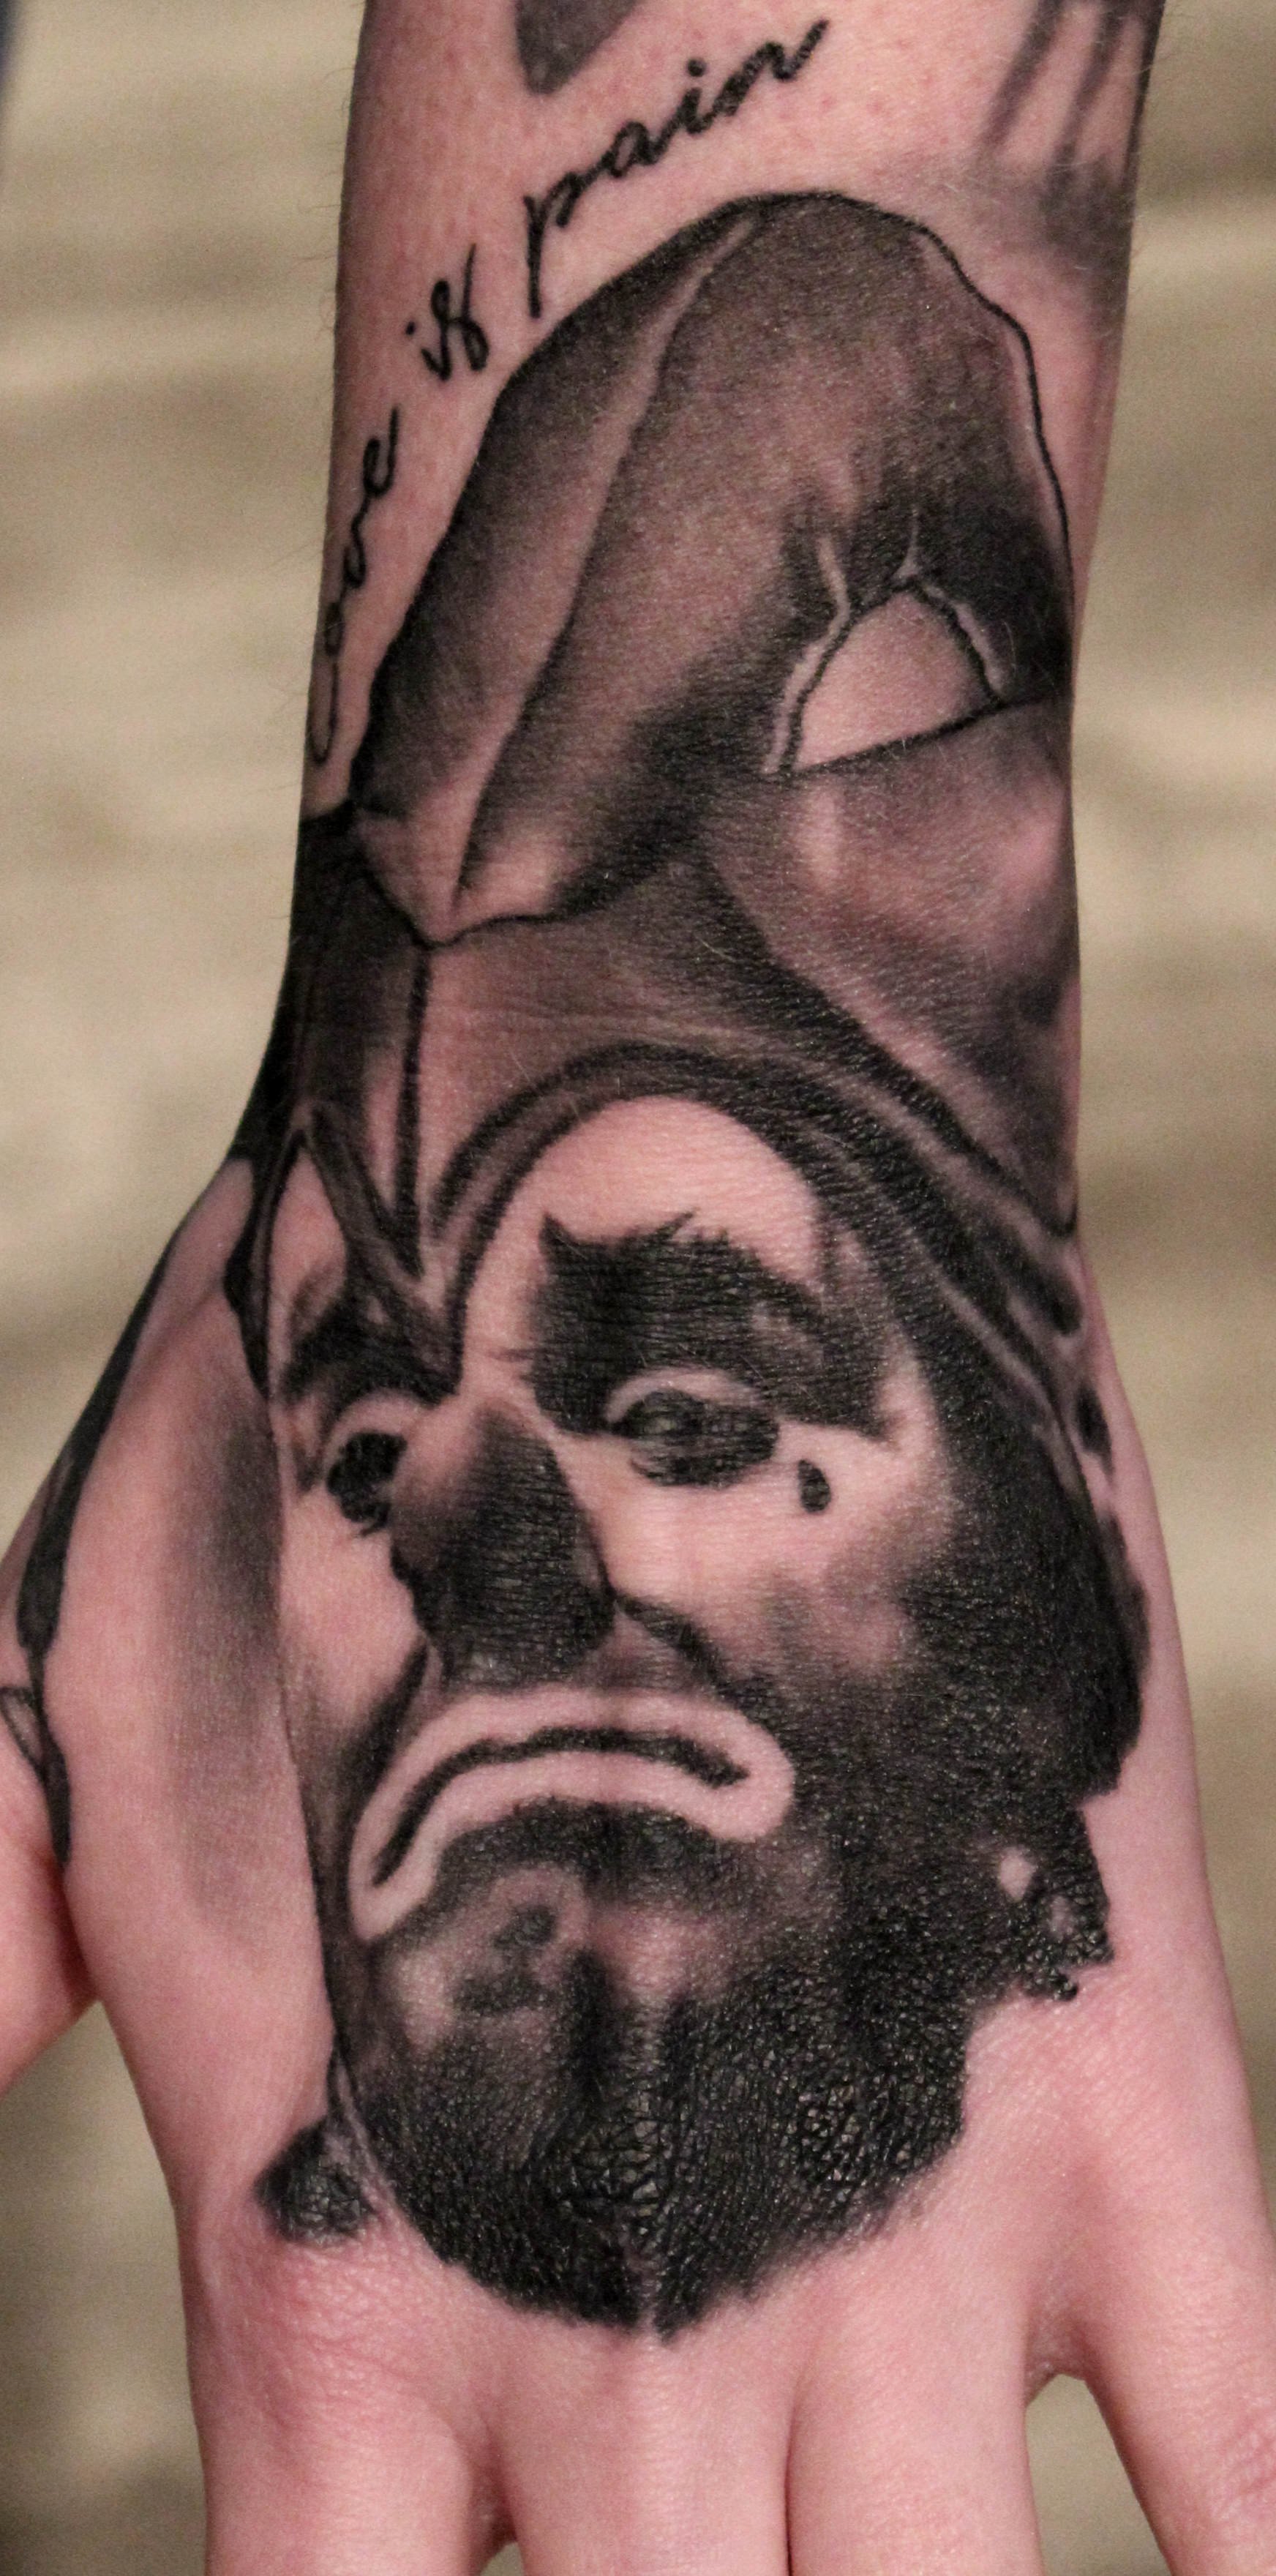 Odin, one of my own tattoo designs coming to life on skin, loved tatto